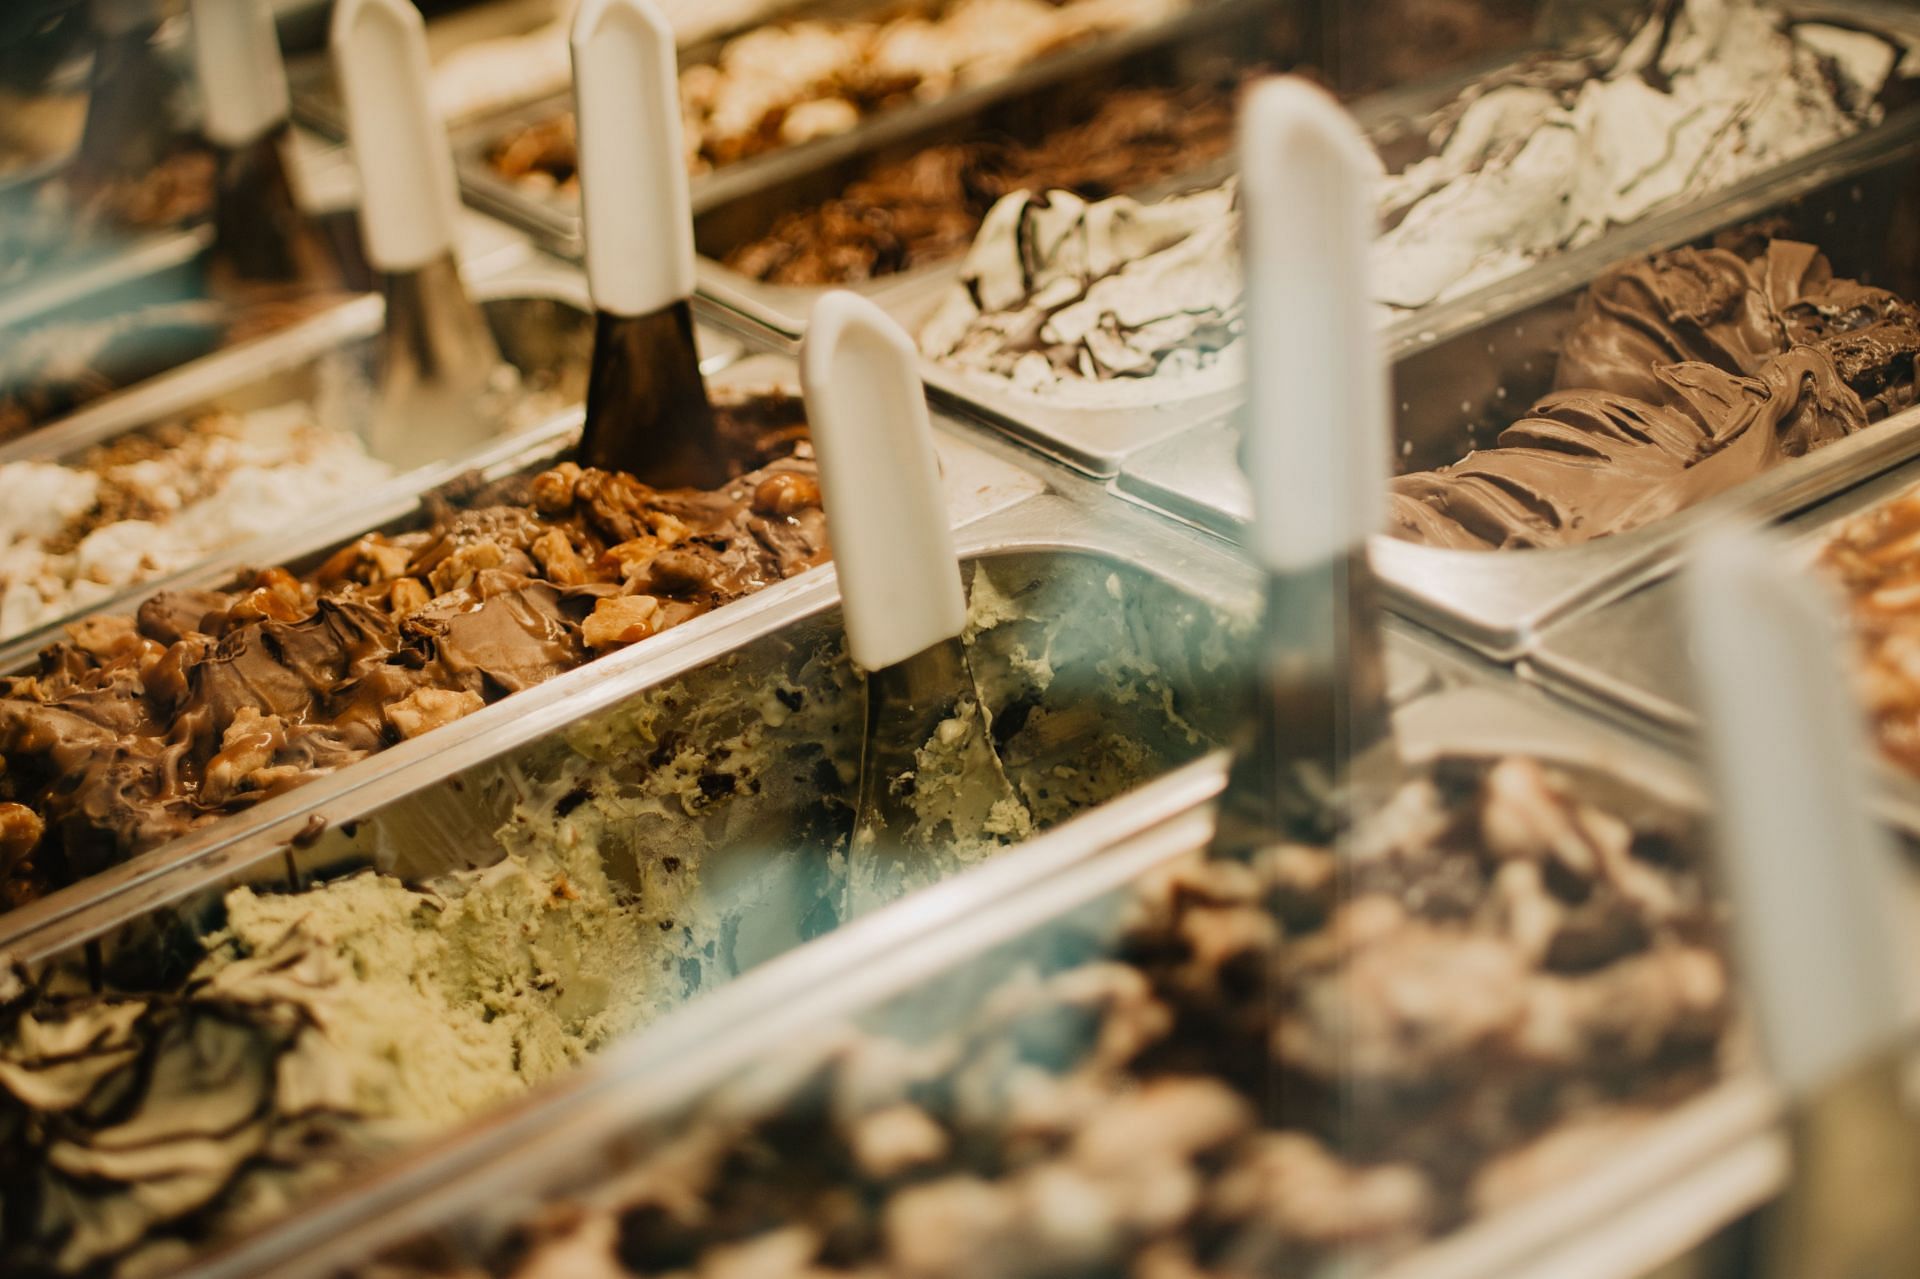 You can even make your own &#039;ice cream healthy version&#039; at home. (image via Pexels/Roman)